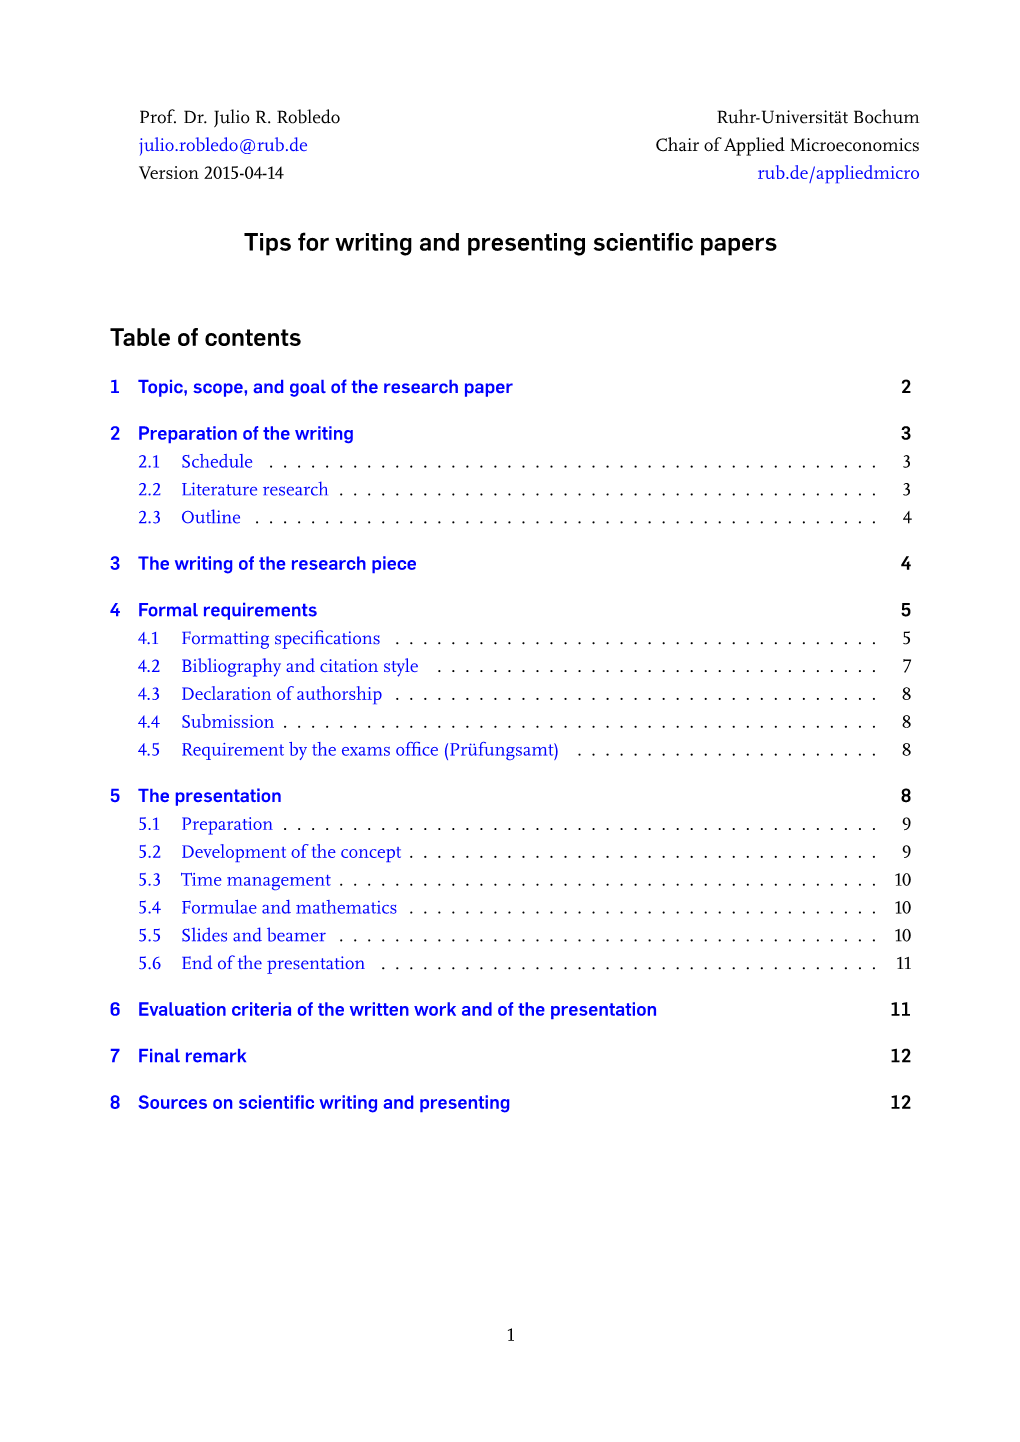 Tips for Writing and Presenting Scientific Papers